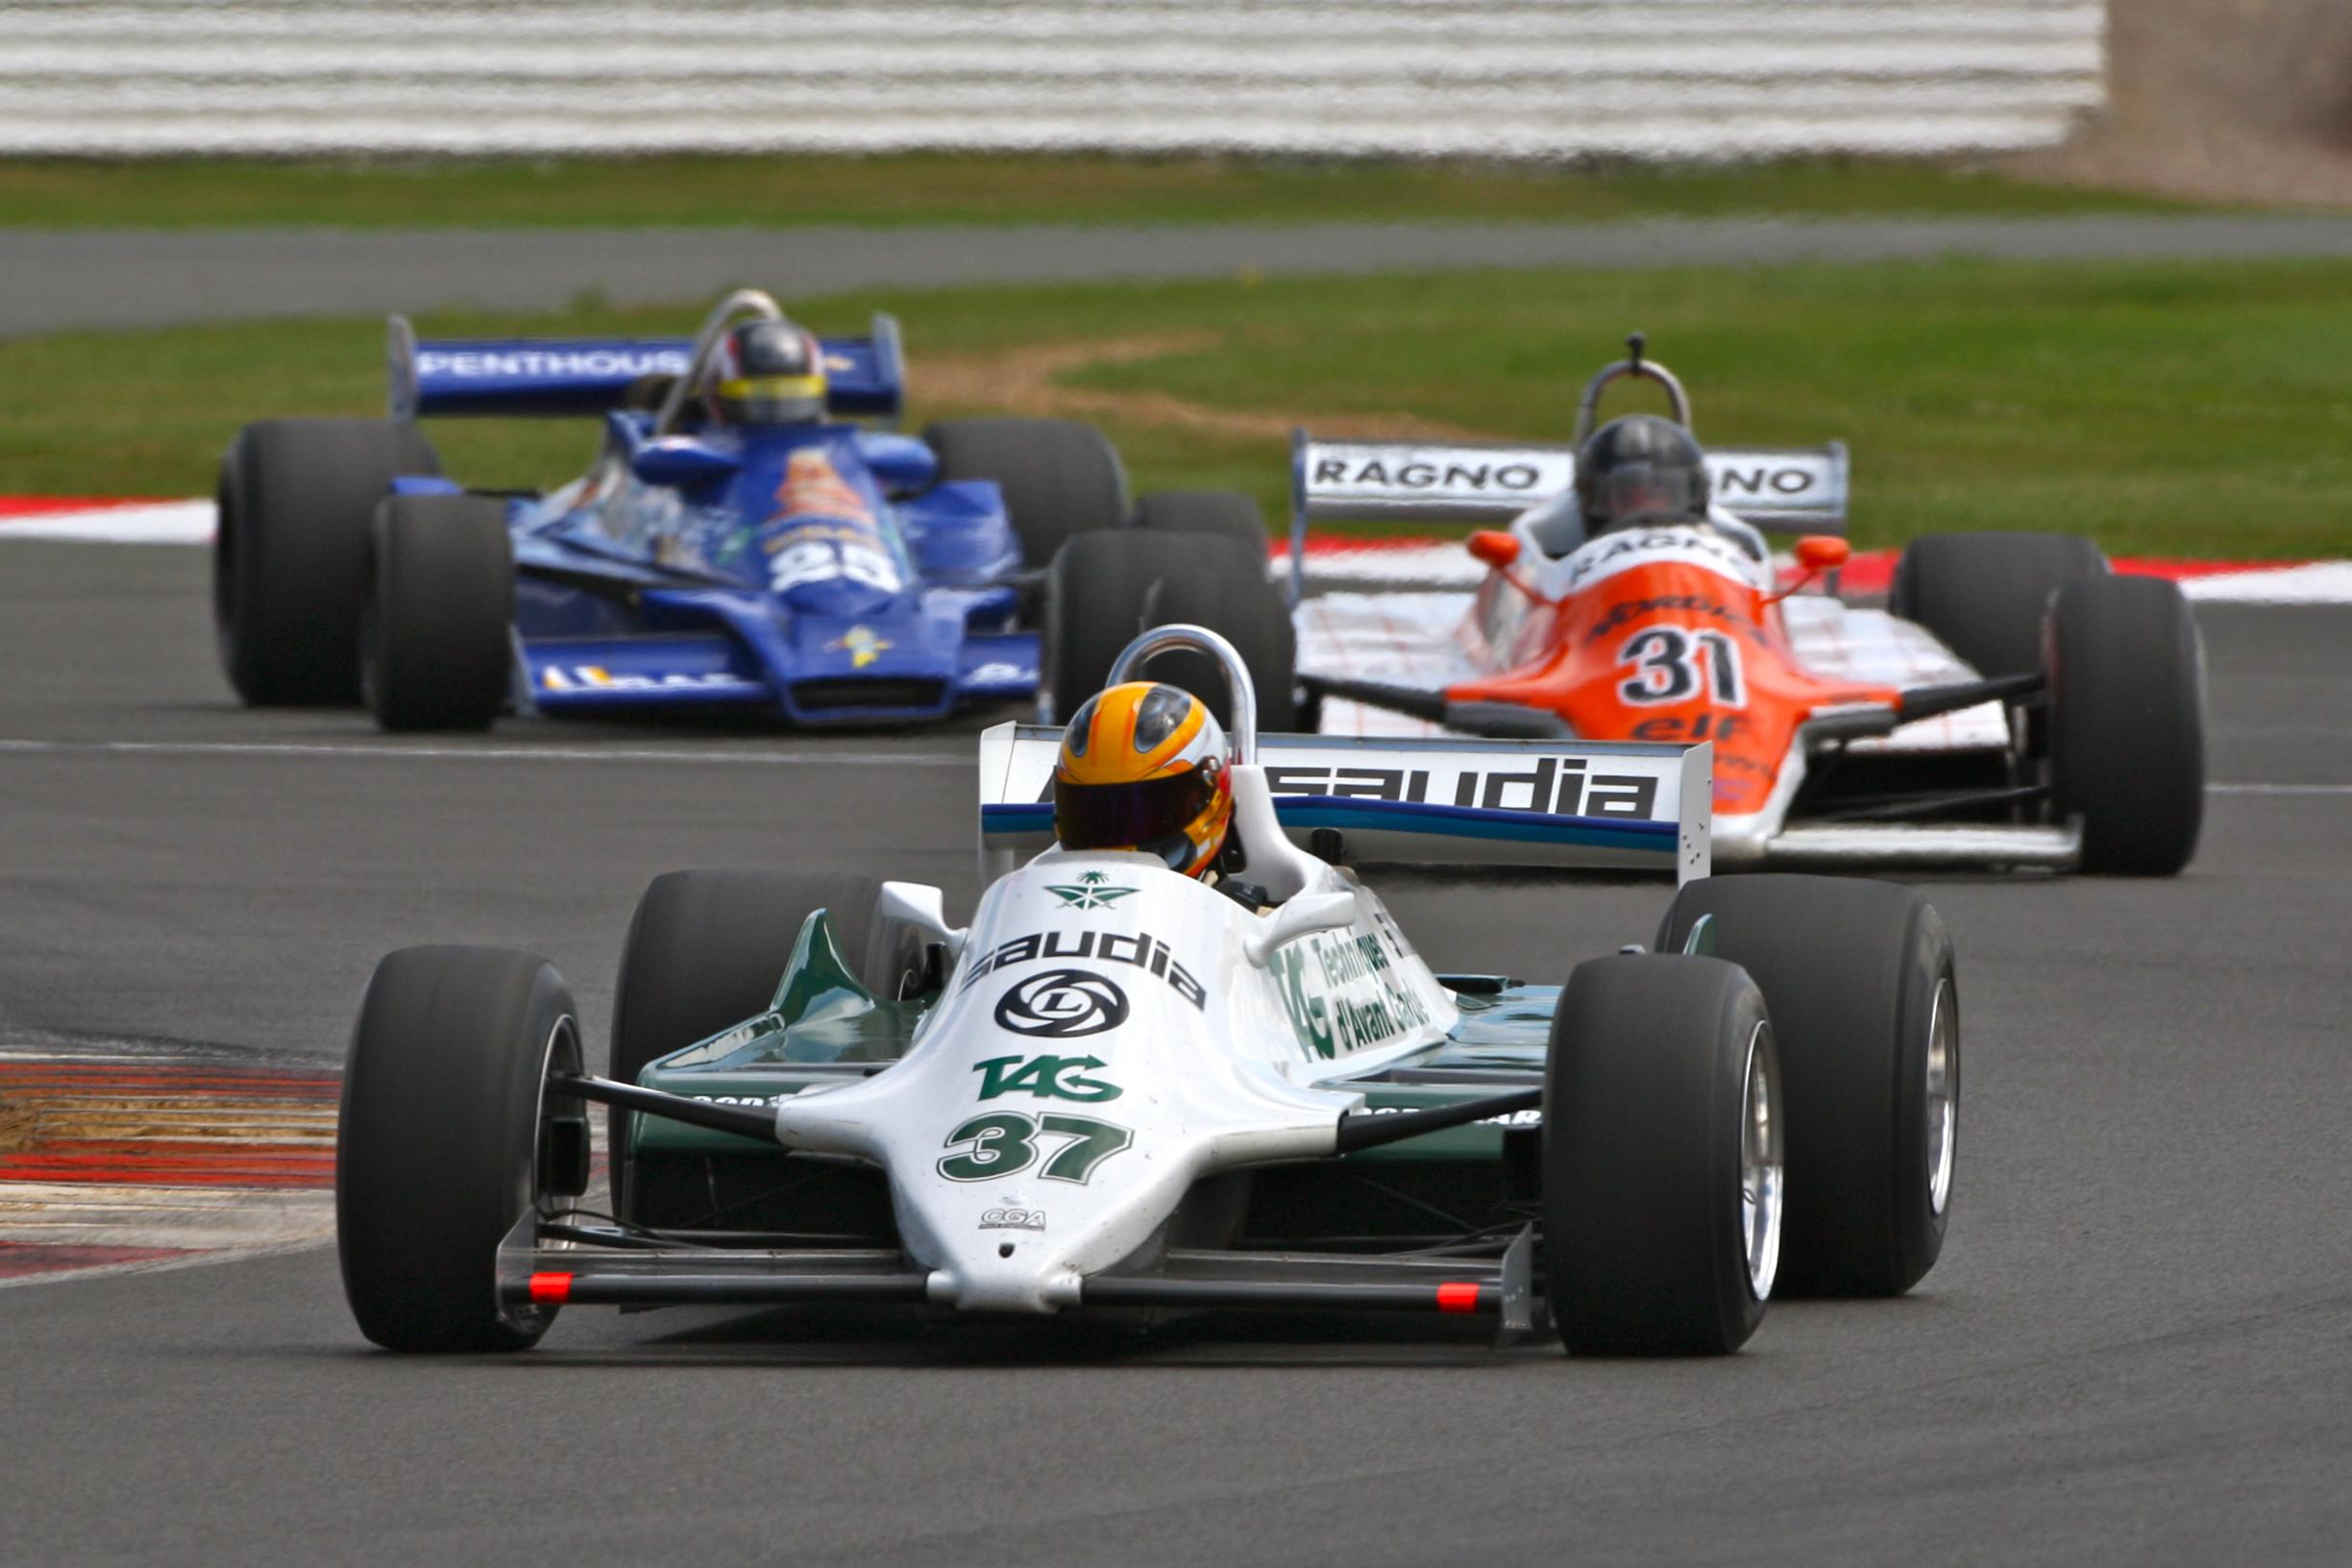 SILVERSTONE TO STAGE THE WORLDS BIGGEST EVER F1 PARADE 